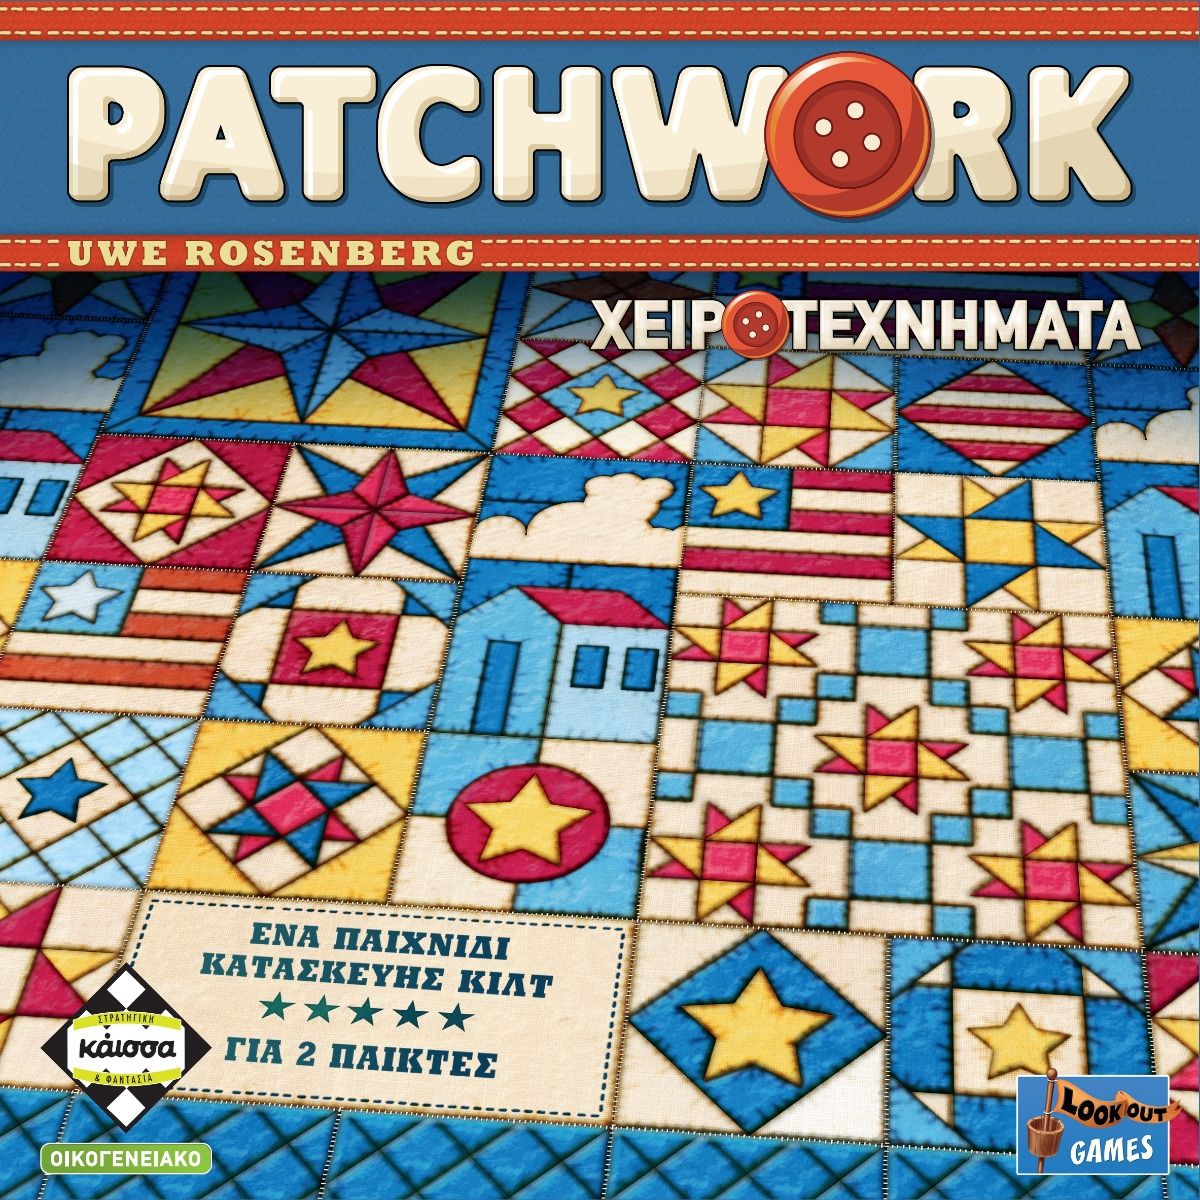 KAISSA BOARD GAME PATCHWORK NEW EDITION